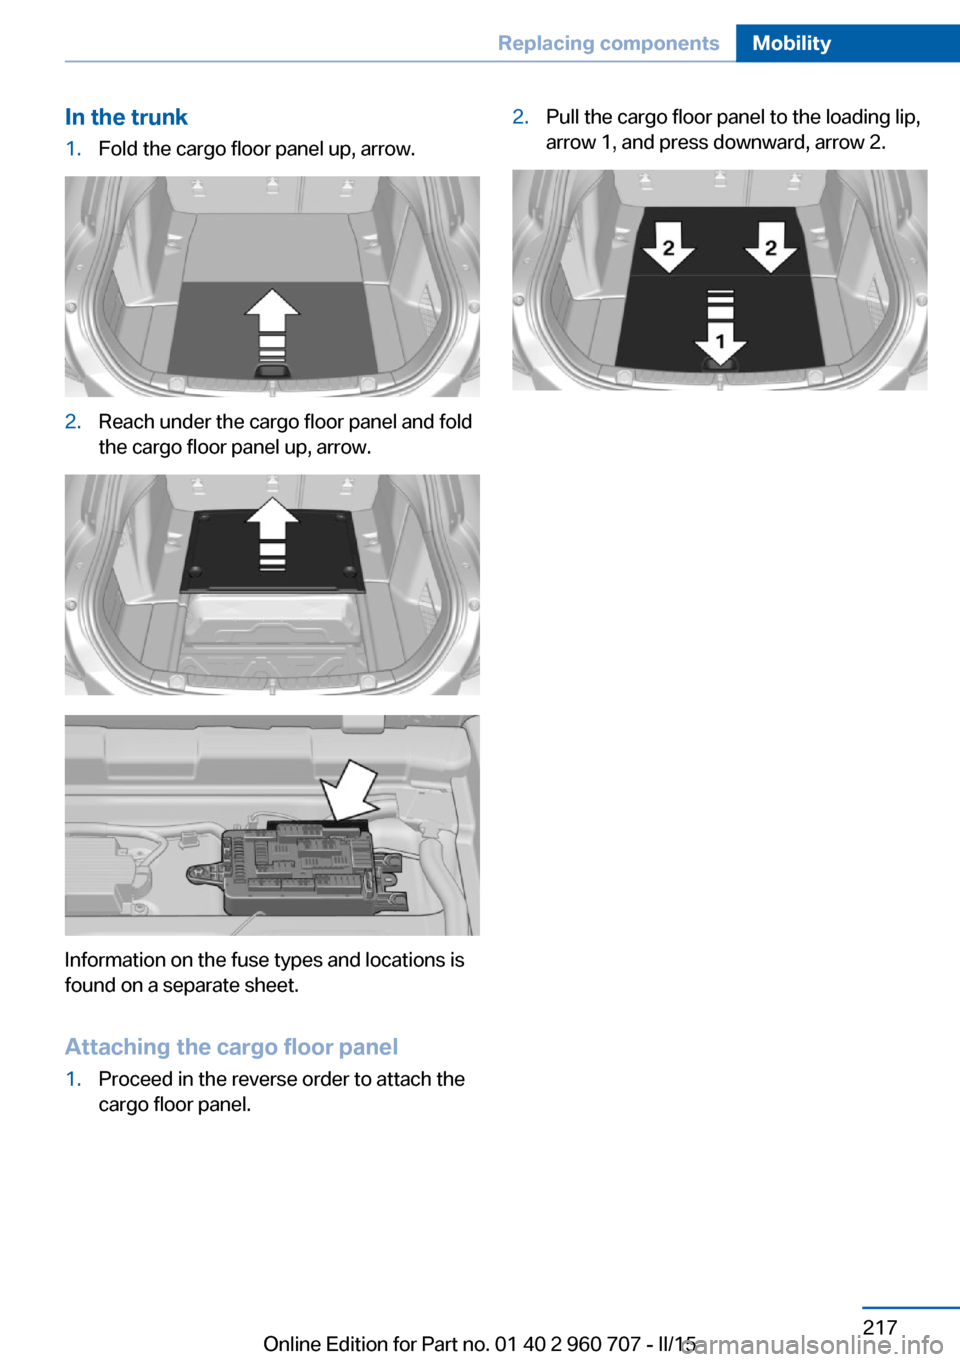 BMW 4 SERIES GRAN COUPE 2015 F36 User Guide In the trunk1.Fold the cargo floor panel up, arrow.2.Reach under the cargo floor panel and fold
the cargo floor panel up, arrow.
Information on the fuse types and locations is
found on a separate shee